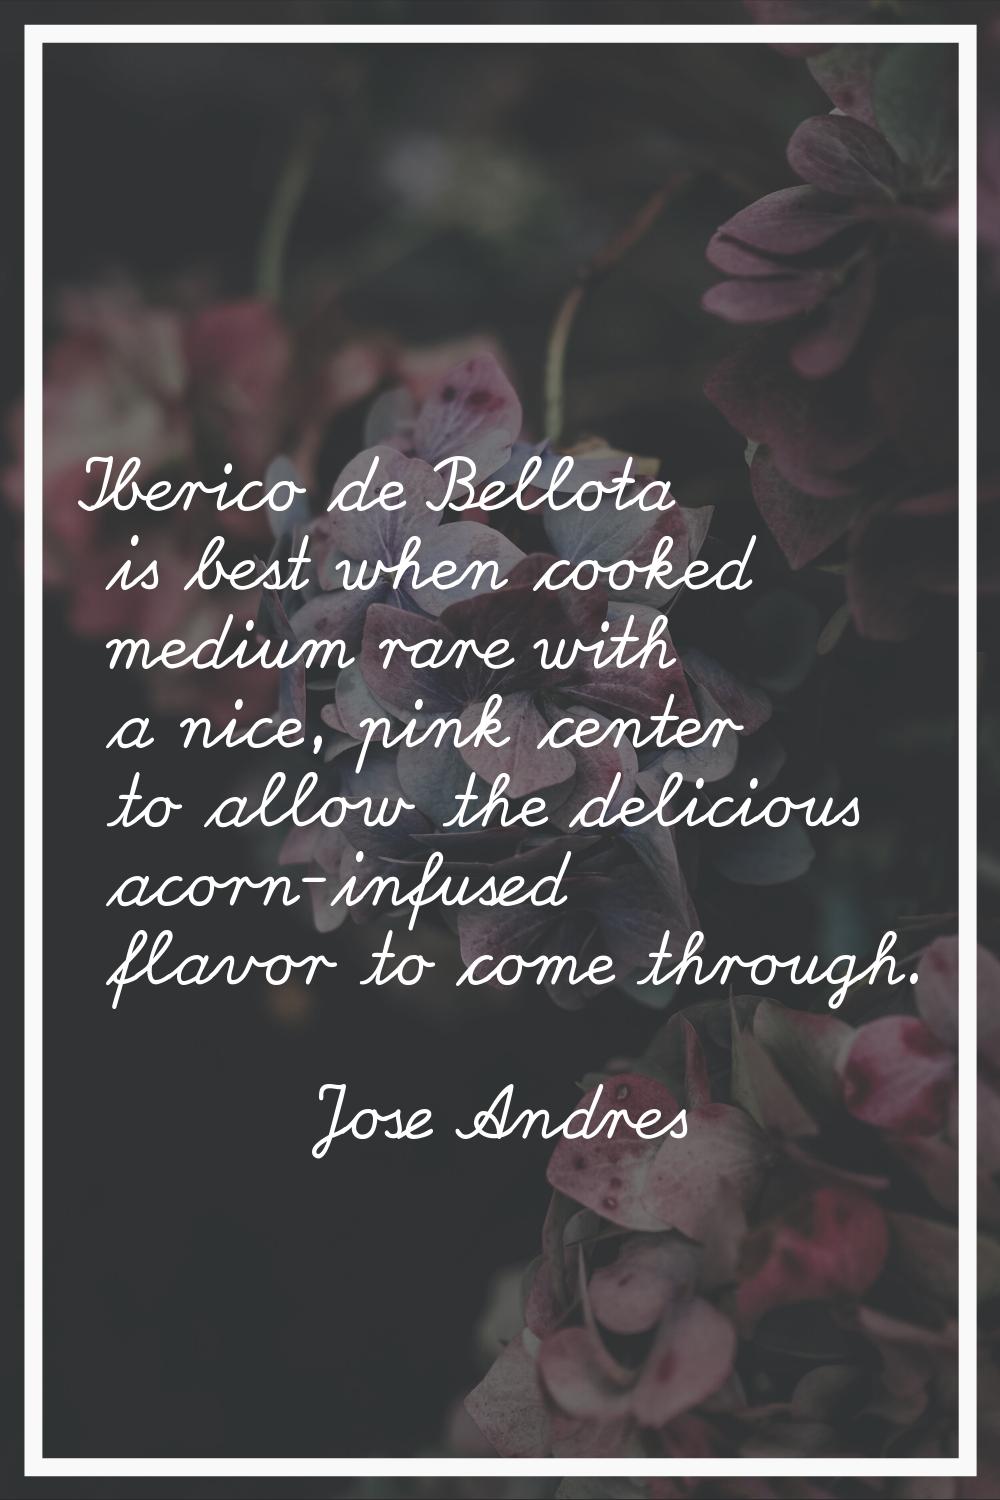 Iberico de Bellota is best when cooked medium rare with a nice, pink center to allow the delicious 